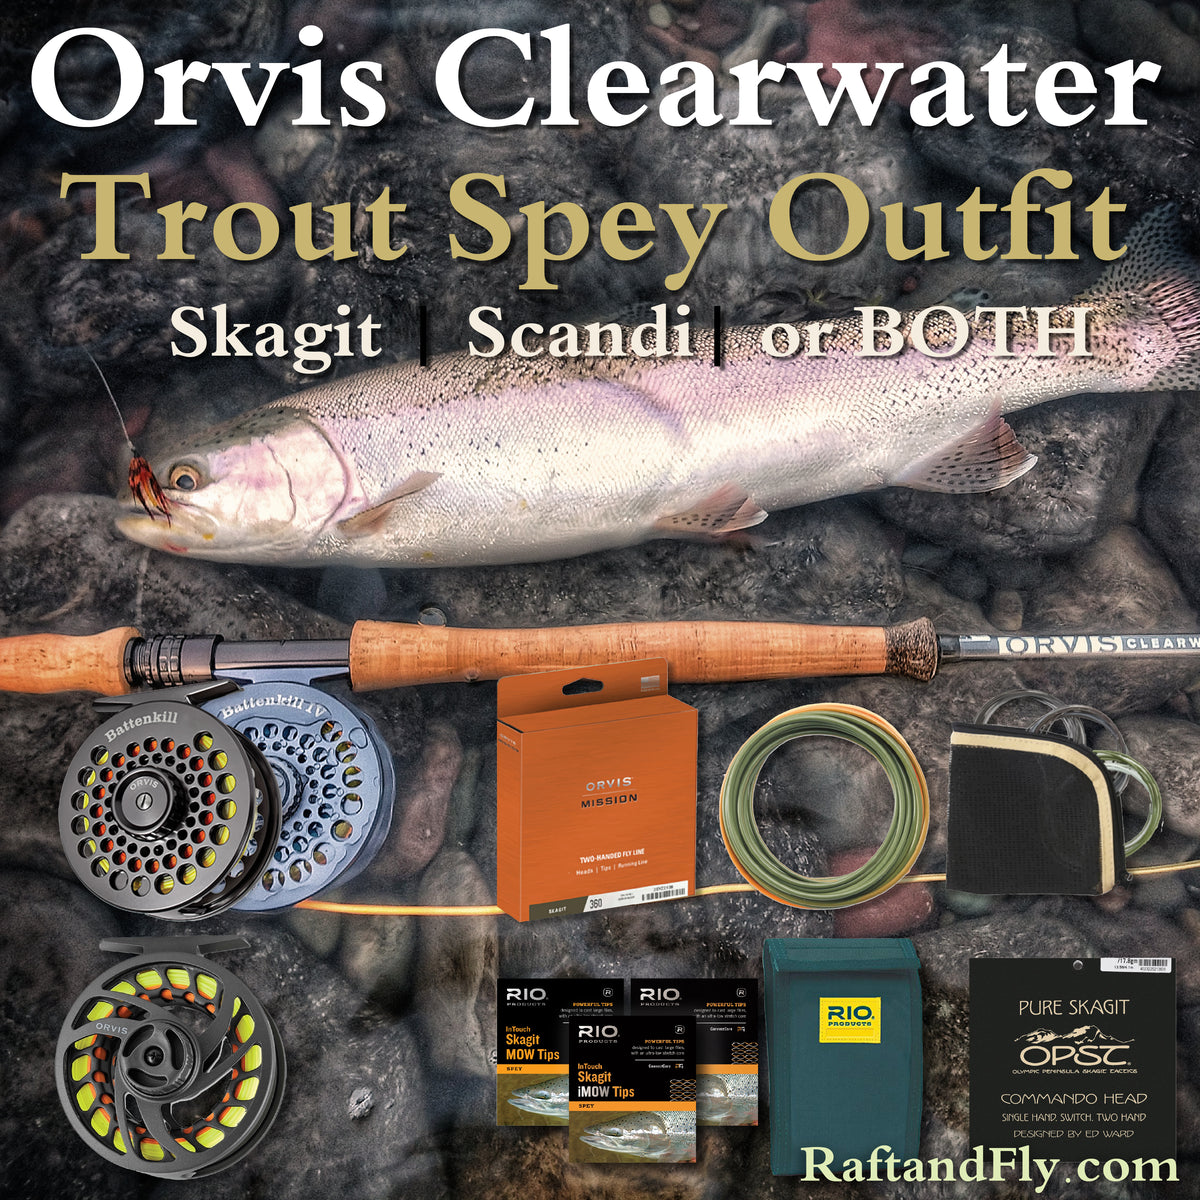 Orvis Clearwater 4wt Trout Spey Outfit 11'4